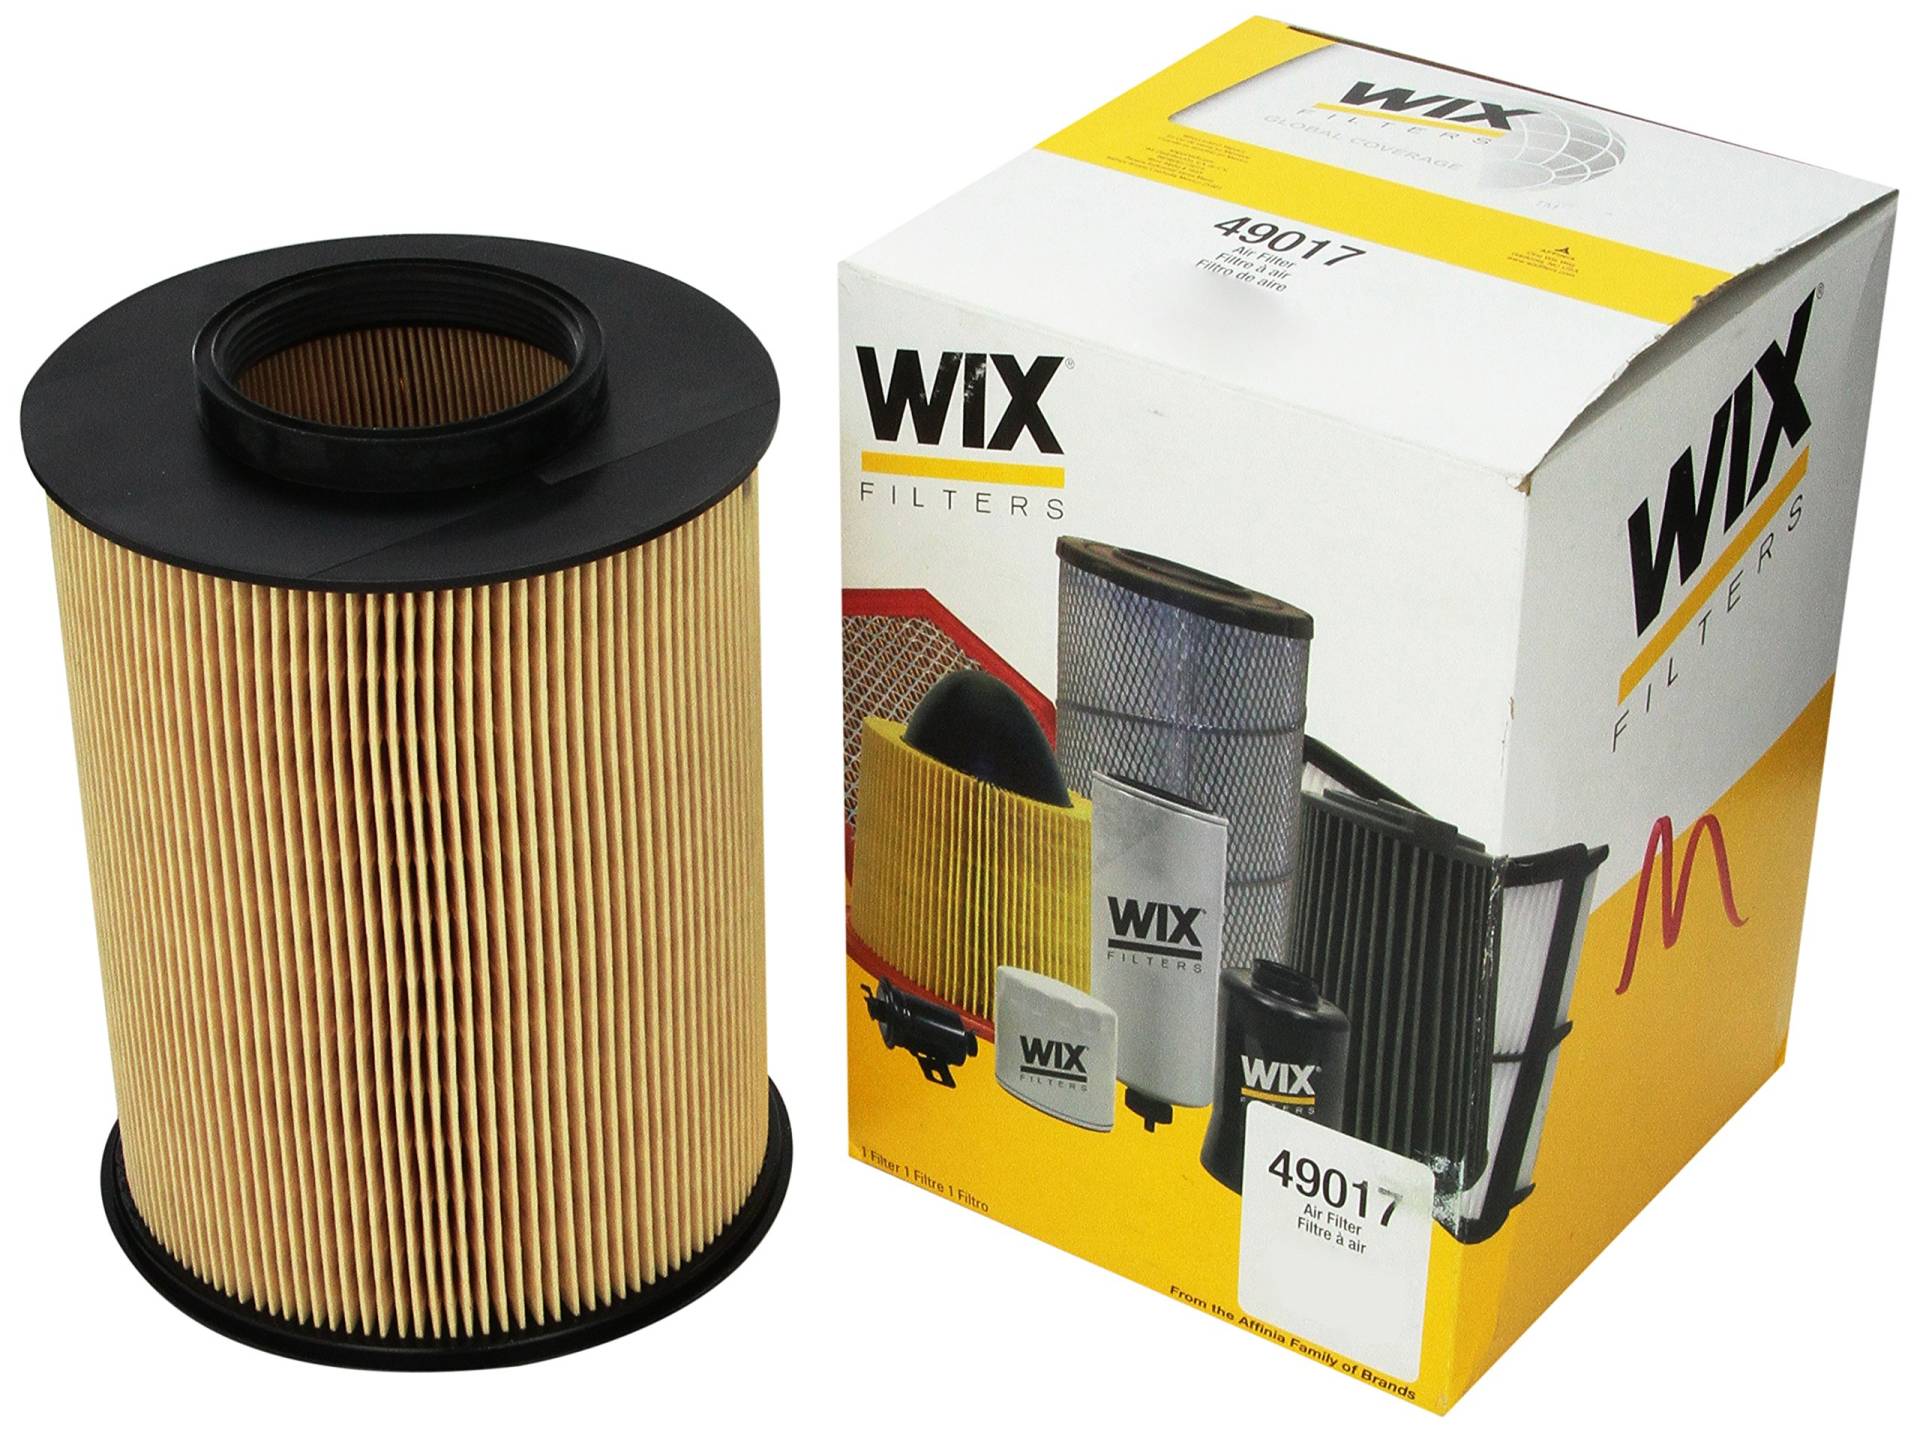 WIX Filters - 49017 Air Filter, Pack of 1 von Wix